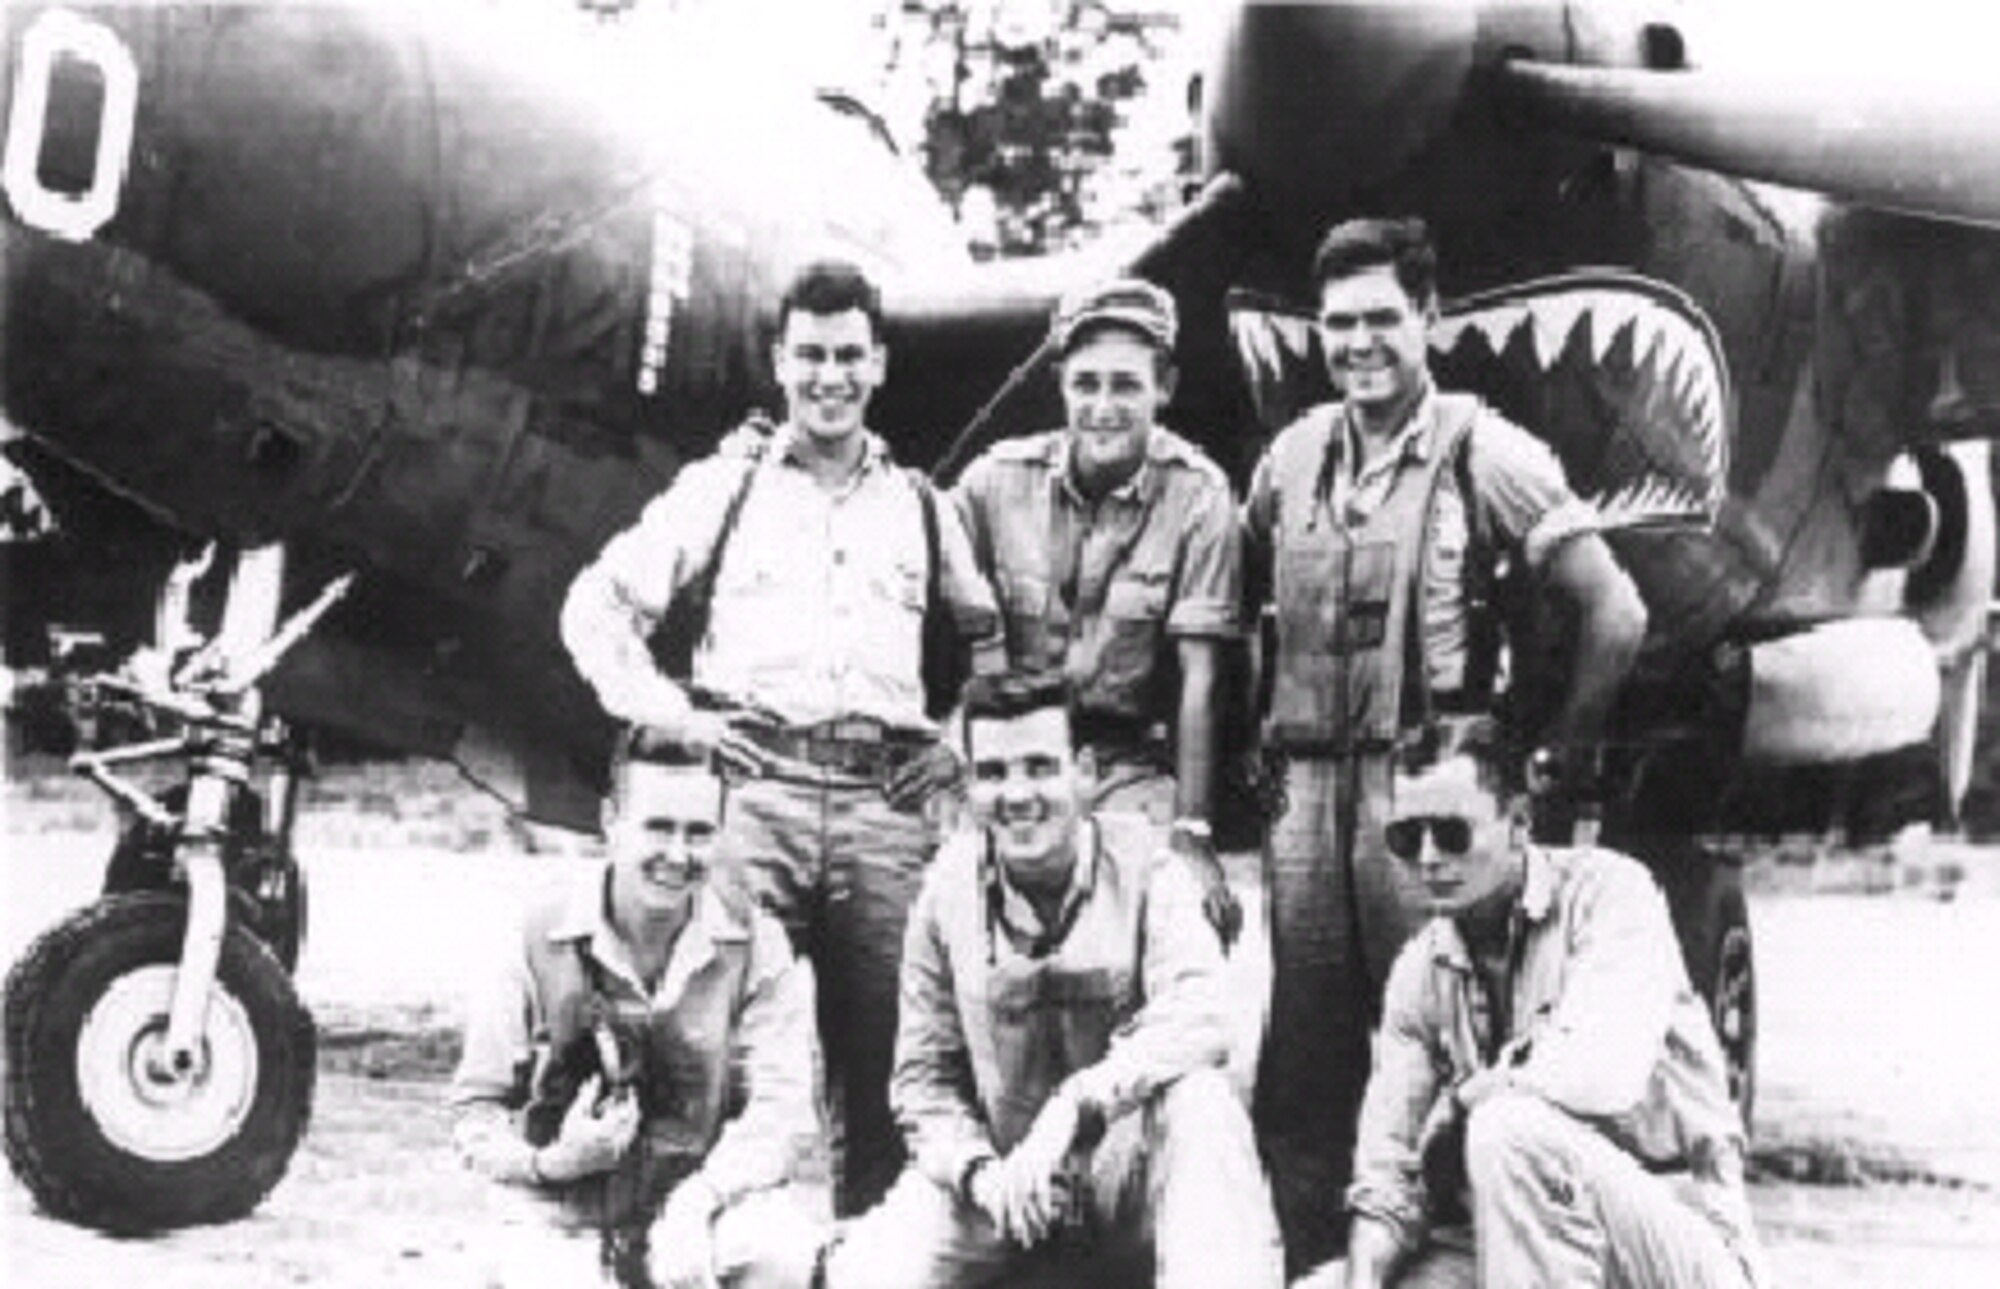 02/02/2007 -- MISAWA AIR BASE, Japan -- Aces of the 39th Fighter Squadron pose by a P-38 in 1943. In the front row, left to right are:  "Sully" O'Sullivan, Tommy Lynch and Ken Sparks. In the back row, left to right are: Dick Suehr, "Shady" Lane and Stan Andrews. (U.S. Air Force photo)